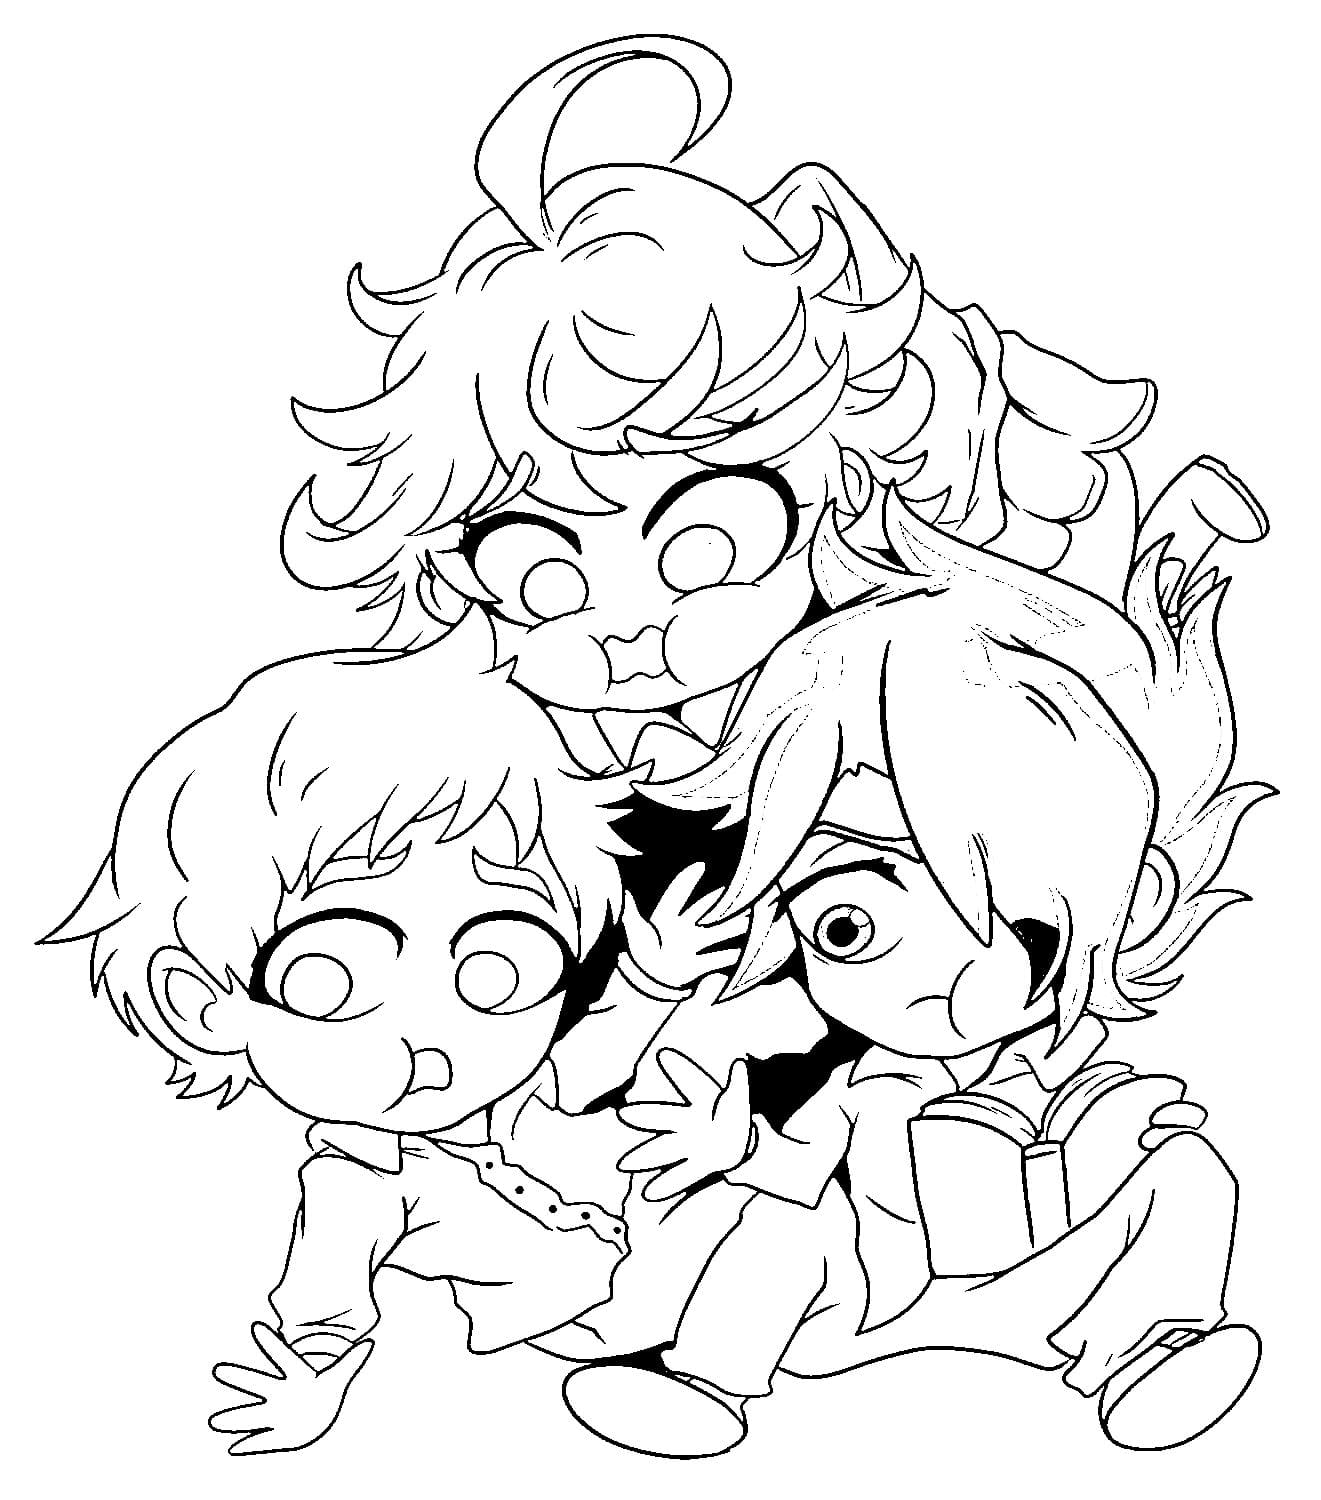 The Promised Neverland coloring pages - Free coloring pages